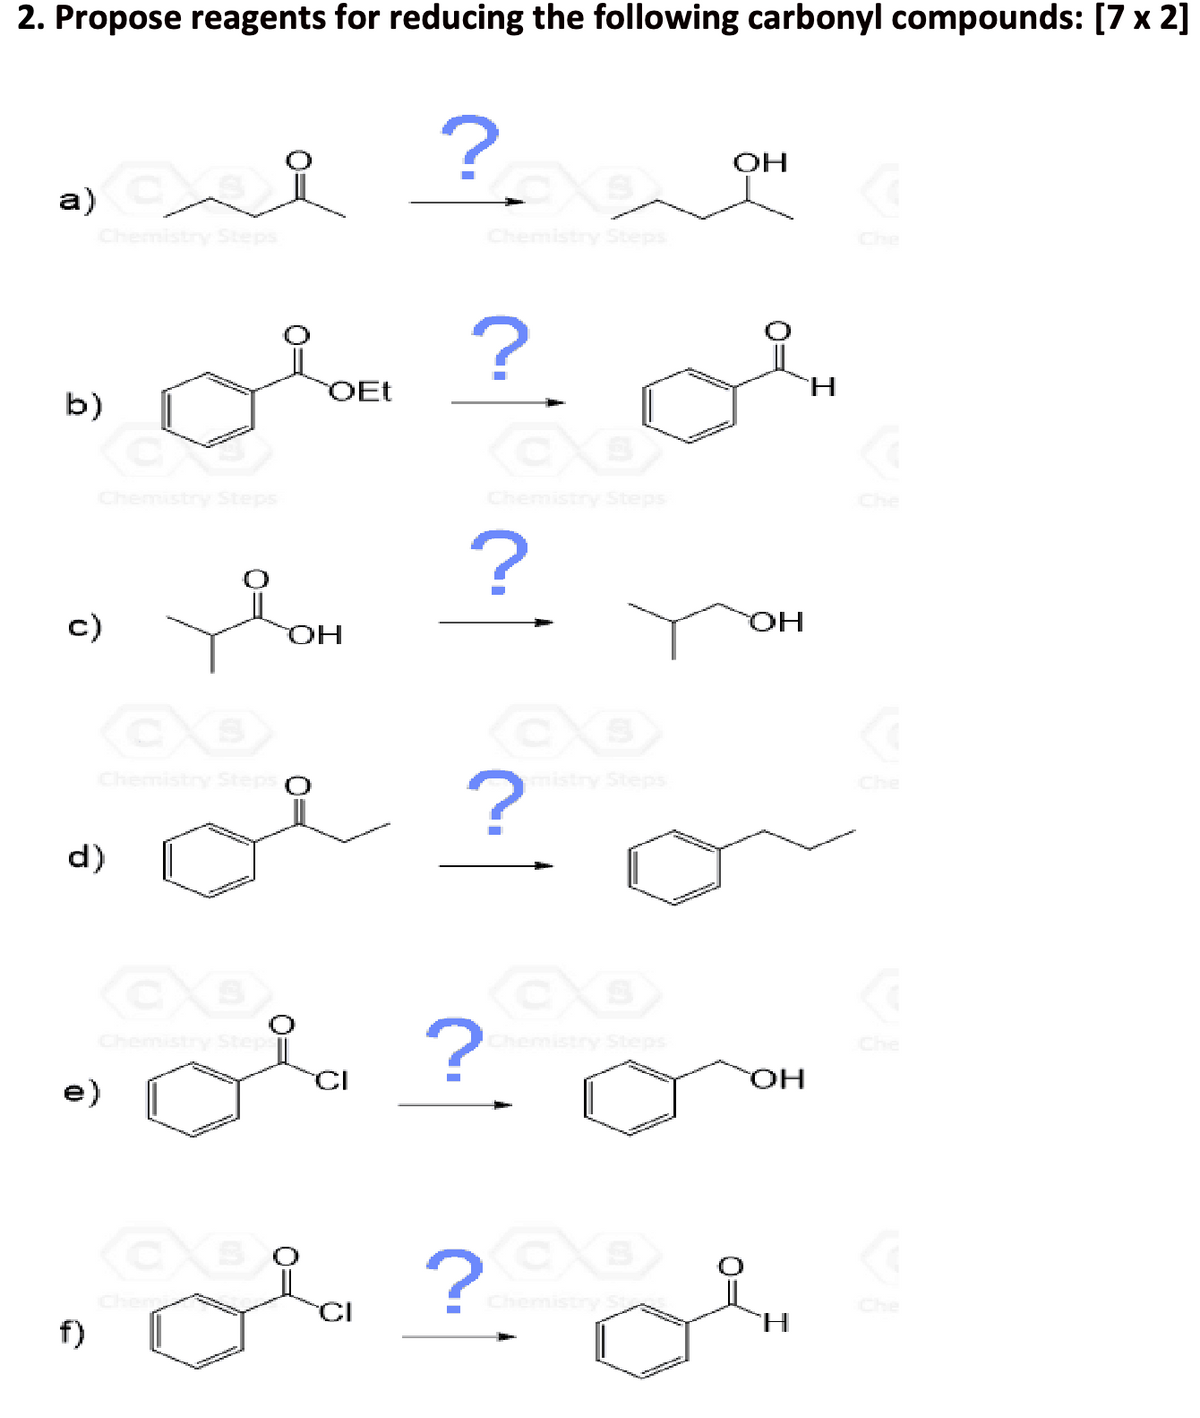 2. Propose reagents for reducing the following carbonyl compounds: [7 x 2]
요?
a) i
Chemistry Steps
?2
Chemistry Steps
OH
Che
b)
c)
d)
Chemistry Steps
CO
Chemistry Steps
OH
OEt
?
co
Chemistry Steps
?
CO
OH
H
A
Che
?
mistry Steps
Che
e)
f)
CO
Chemistry Step
Cher
요
CI
?
CO
Chemistry Steps
CO
?
Chemistry St
Che
OH
H